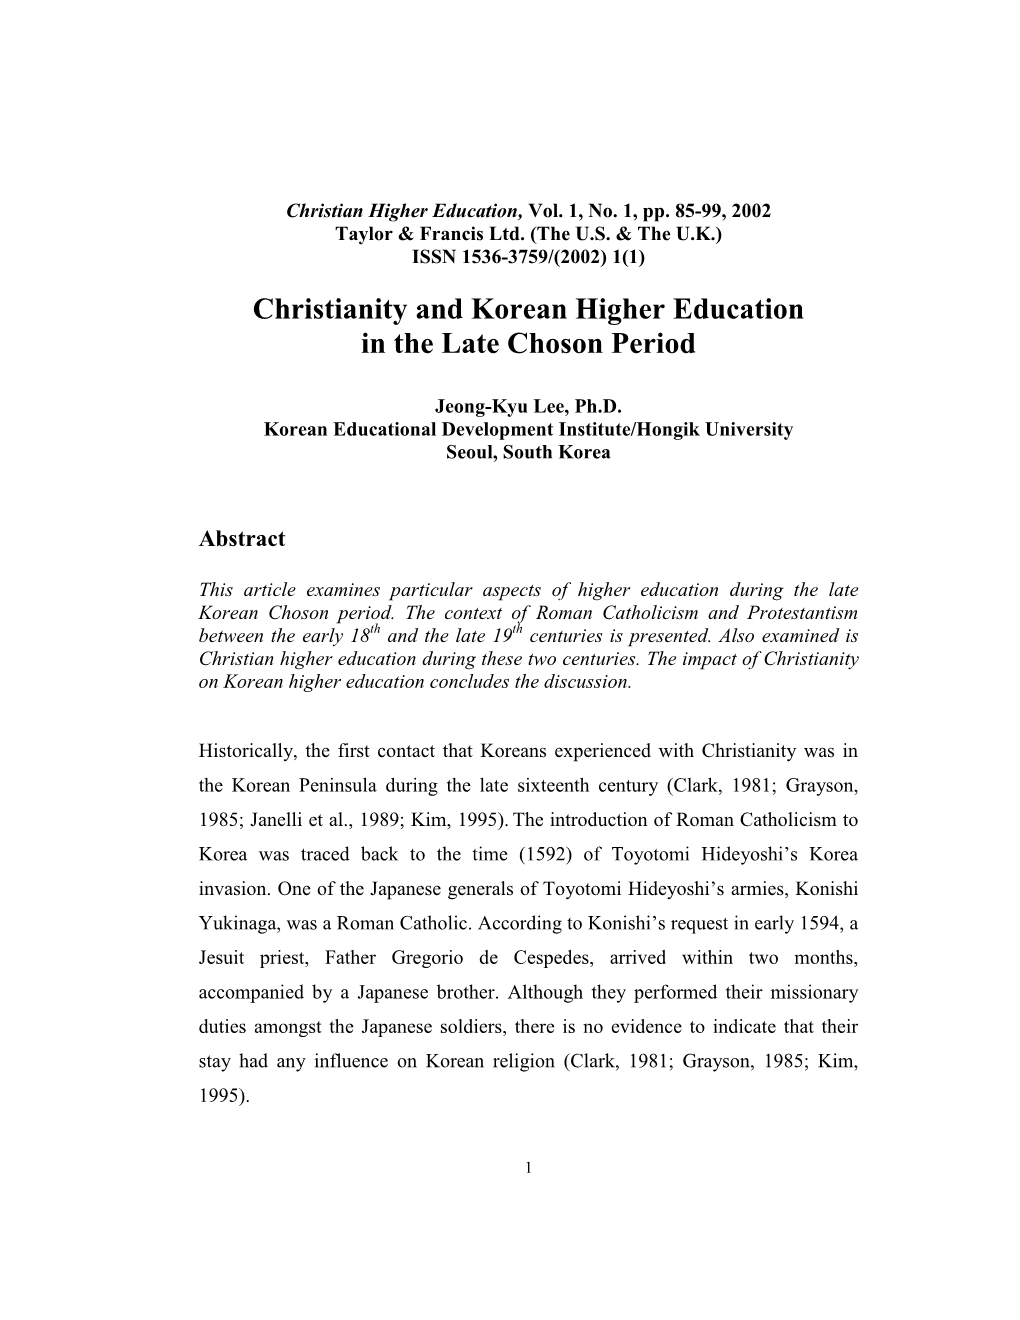 Christianity and Korean Higher Education in the Late Choson Period